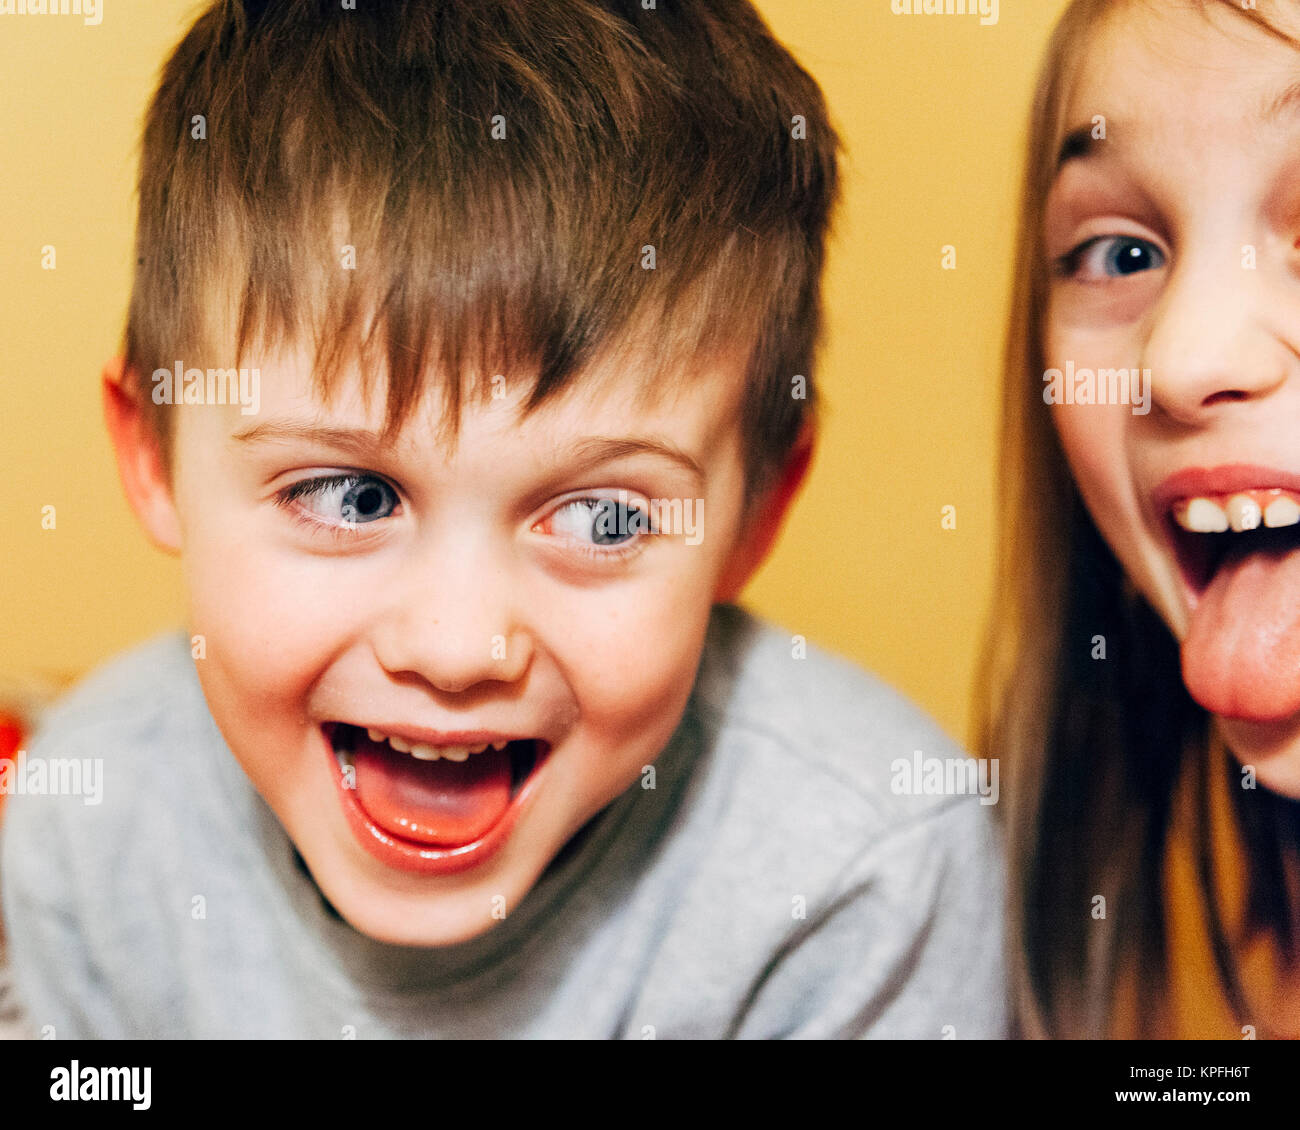 Candid image of young caucasian siblings, a boy and a girl, laughing excitedly  Model Release: Yes.  Property Release: No. Stock Photo